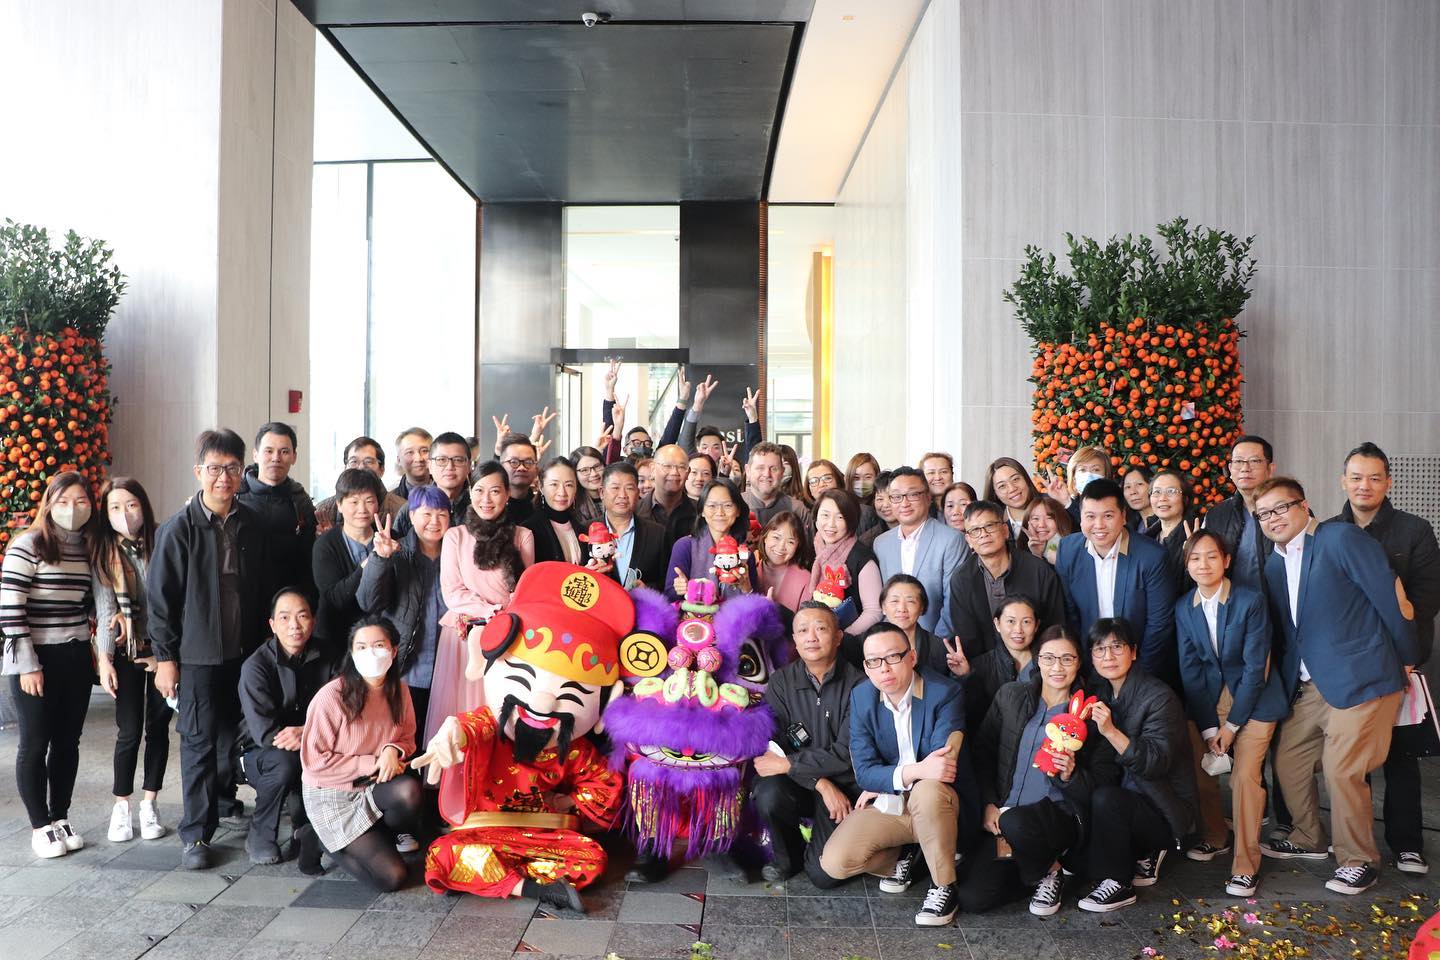 With lions dancing and reaching new heights at EAST, we wish the Taikoo neighbourhood and everyone a wonderful Year of The Rabbit!

#atEAST #EASTHongKong #StayatEAST #EatatEAST #PlayatEAST #ChineseNewYear #CNY2023 #LunarNewYear